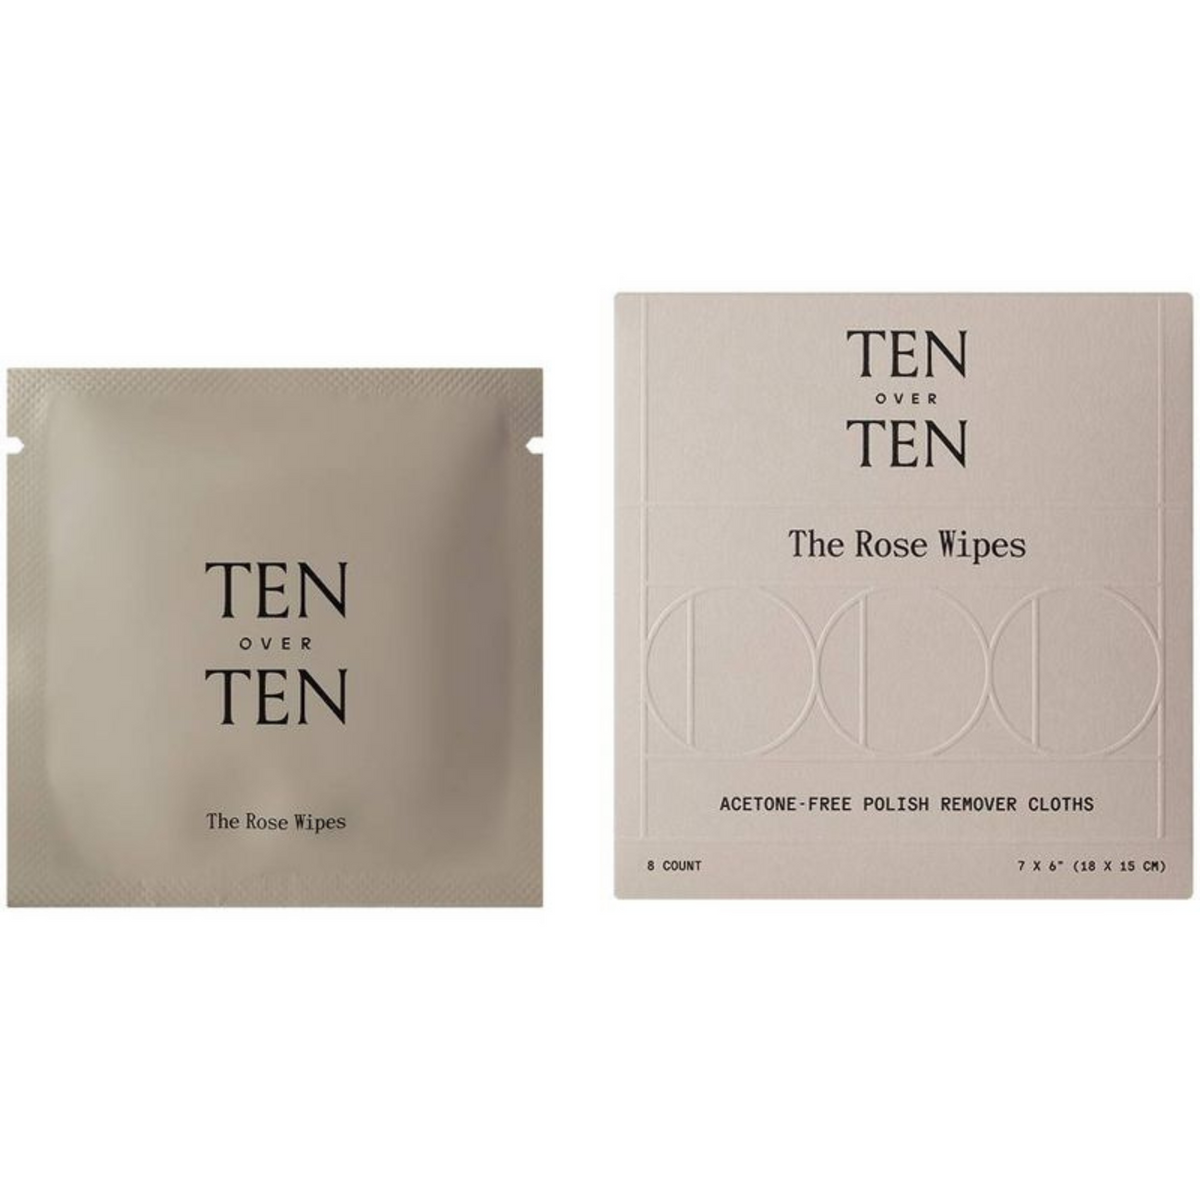 Primary Image of tenoverten The Rose Wipes (8 count)